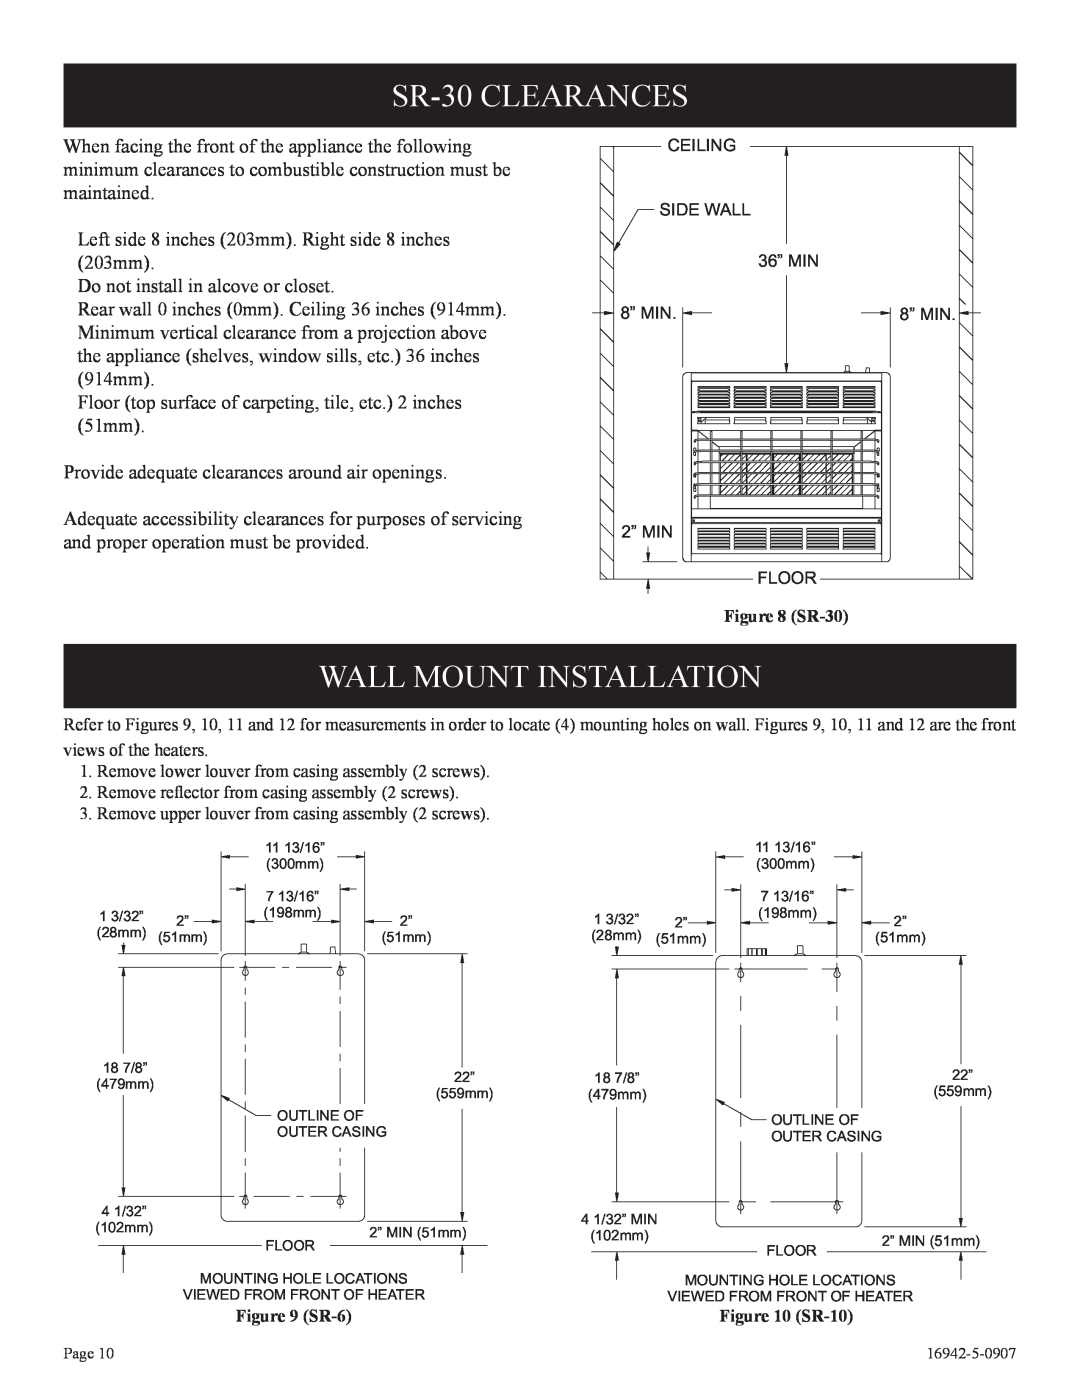 Empire Comfort Systems installation instructions SR-30CLEARANCES, Wall Mount Installation 